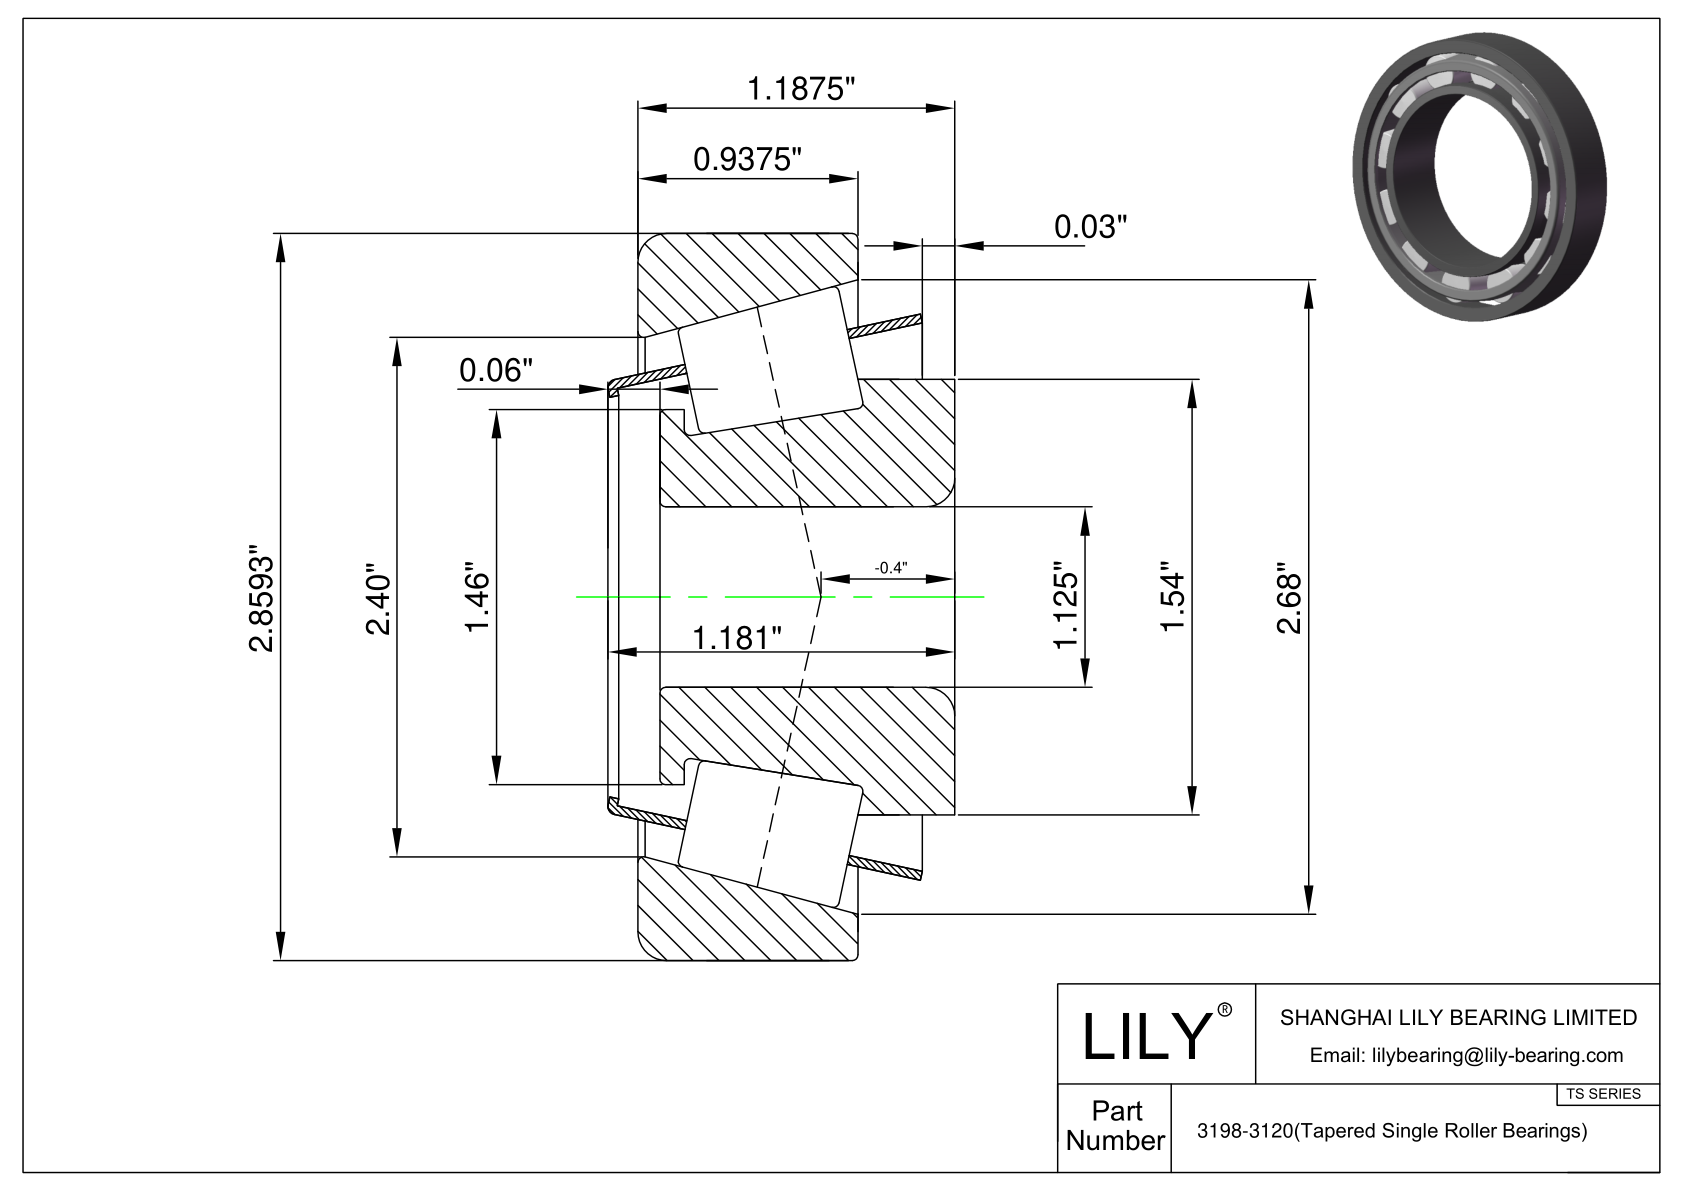 3198-3120 TS (Tapered Single Roller Bearings) (Imperial) cad drawing